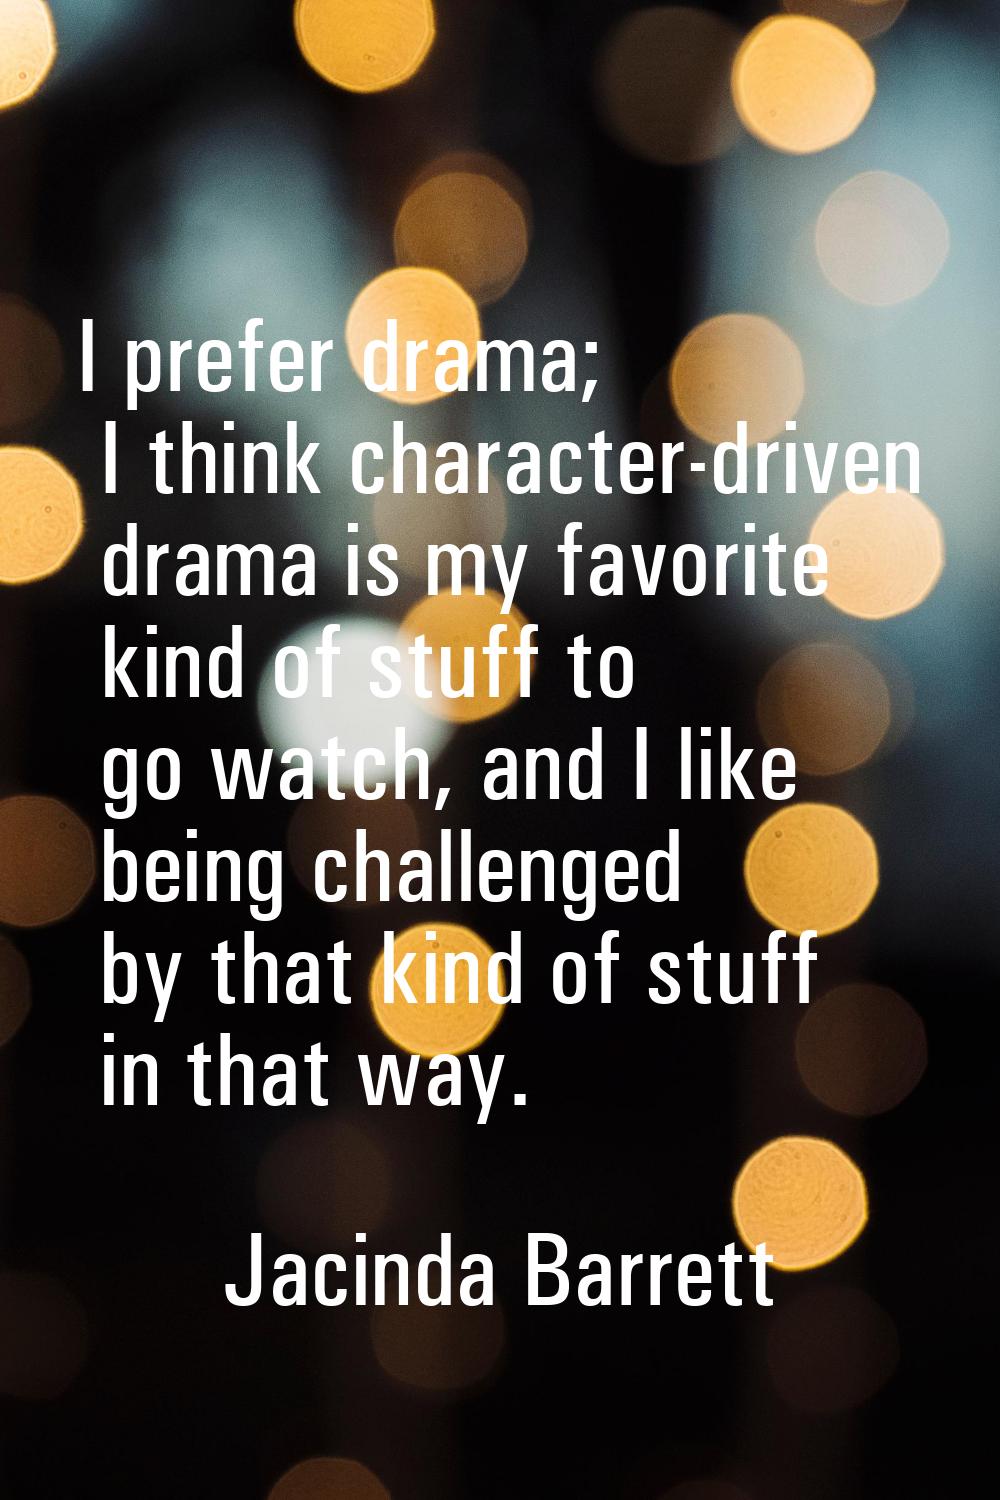 I prefer drama; I think character-driven drama is my favorite kind of stuff to go watch, and I like